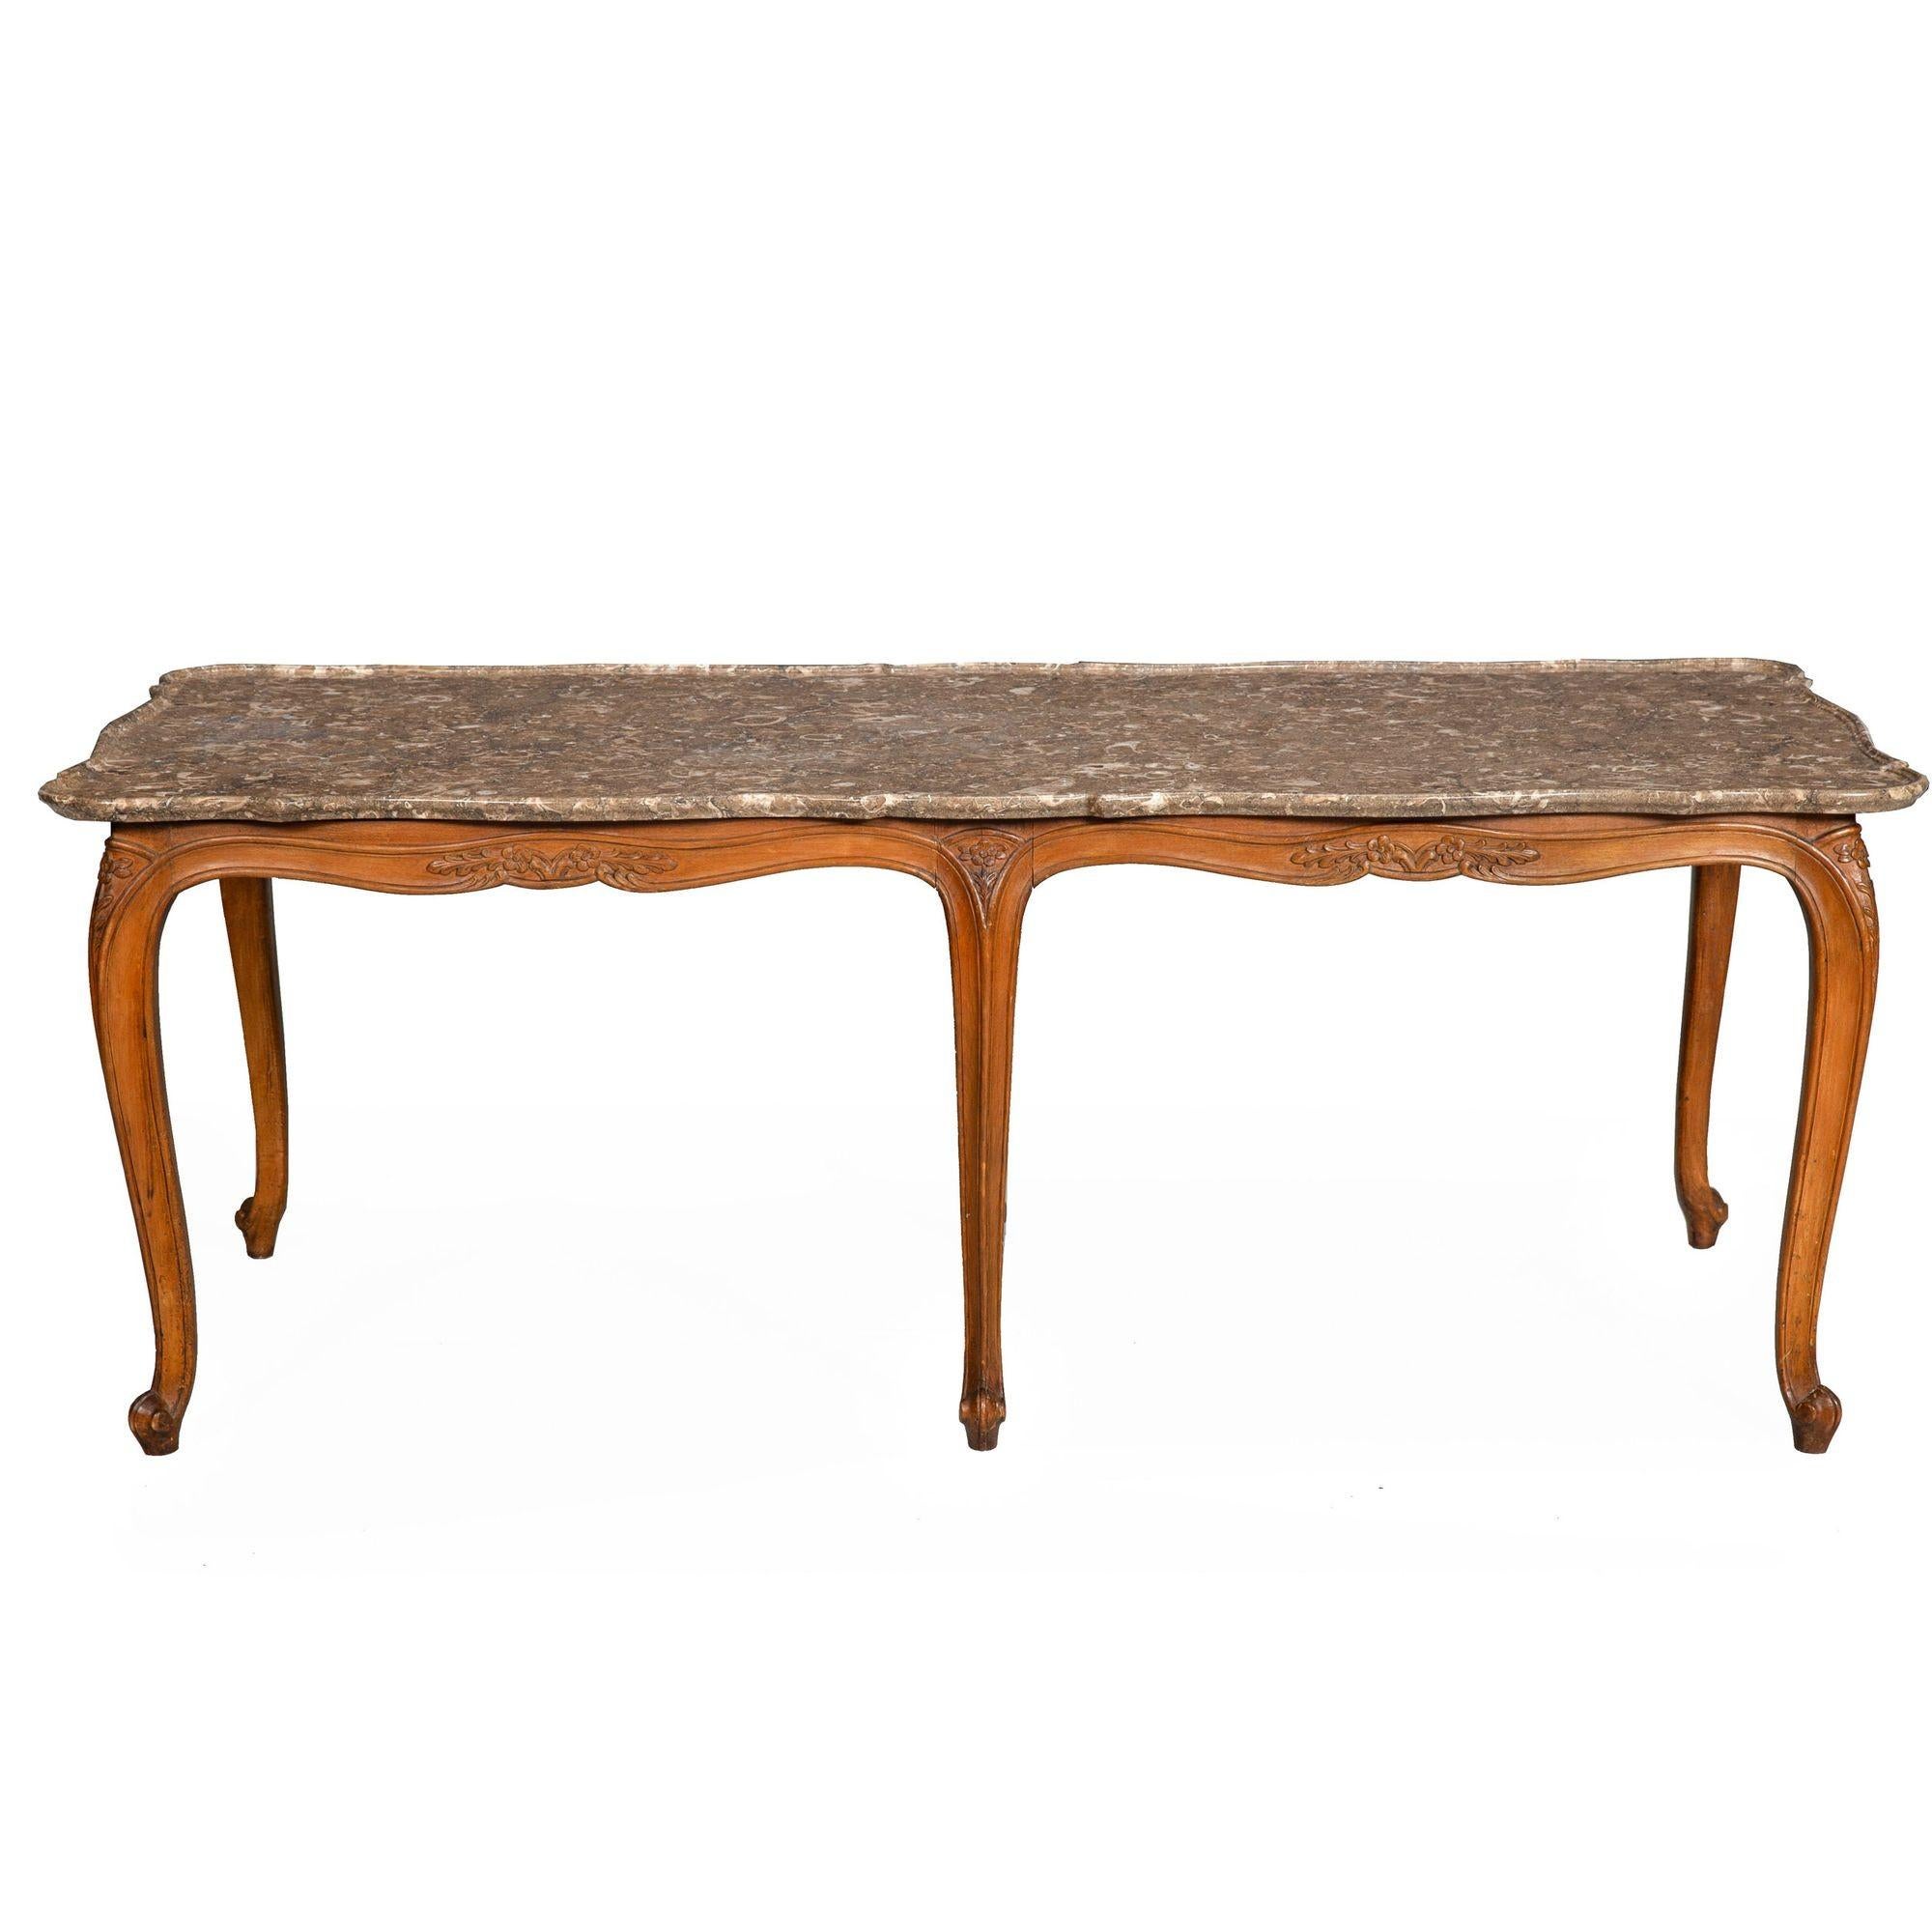 CARVED WALNUT MARBLE-TOP LOW COFFEE TABLE IN THE LOUIS XV TASTE
France, circa 1900
Item # 403KQO18P

A wonderful French coffee table with the most spectacular marble top - this gorgeous fosselized stone top features a scooped edge carved of the